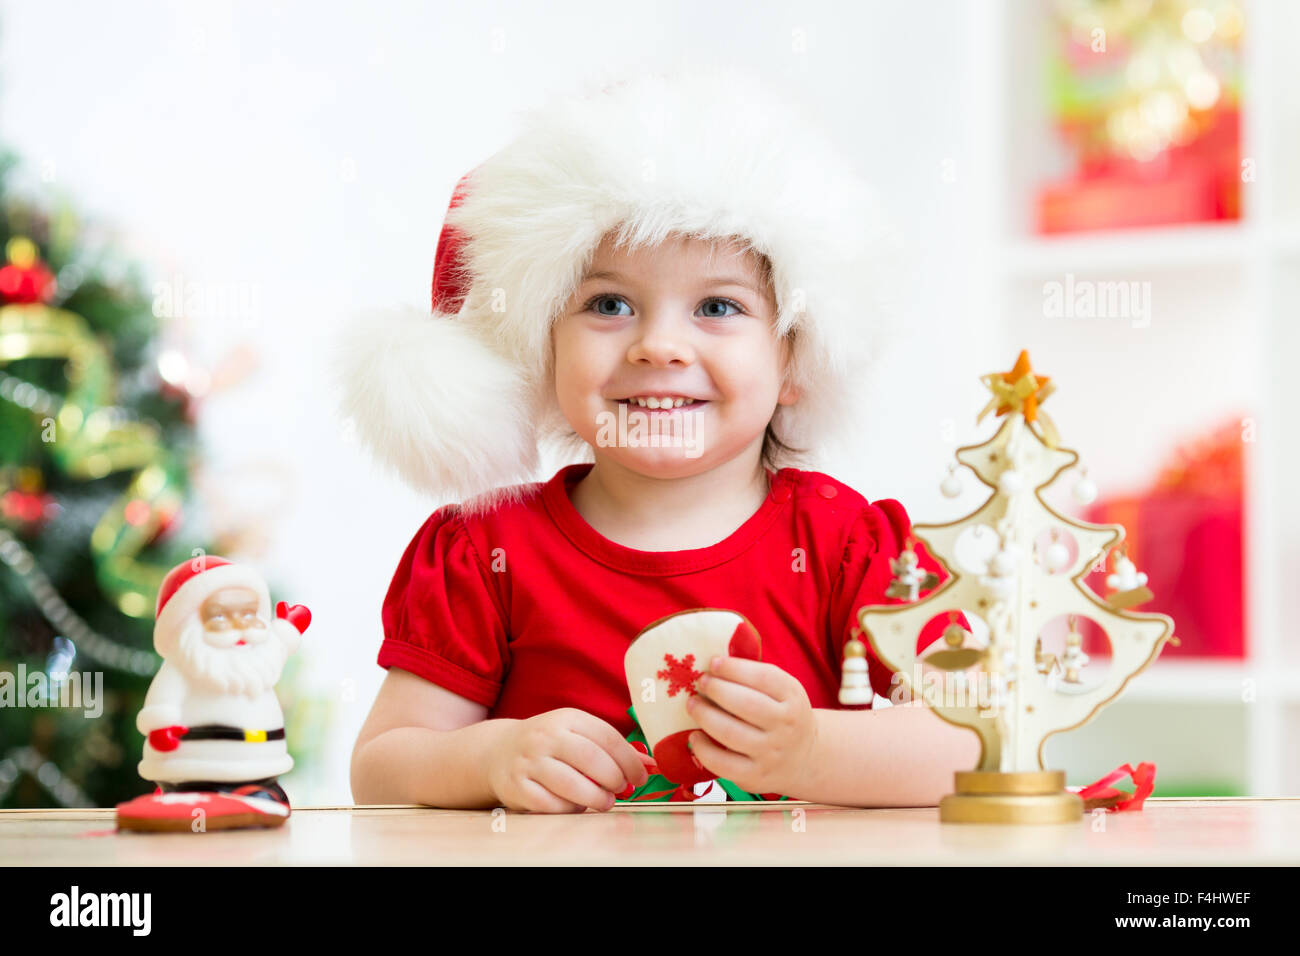 Little girl child wearing a festive red Santa hat with Christmas cookies Stock Photo